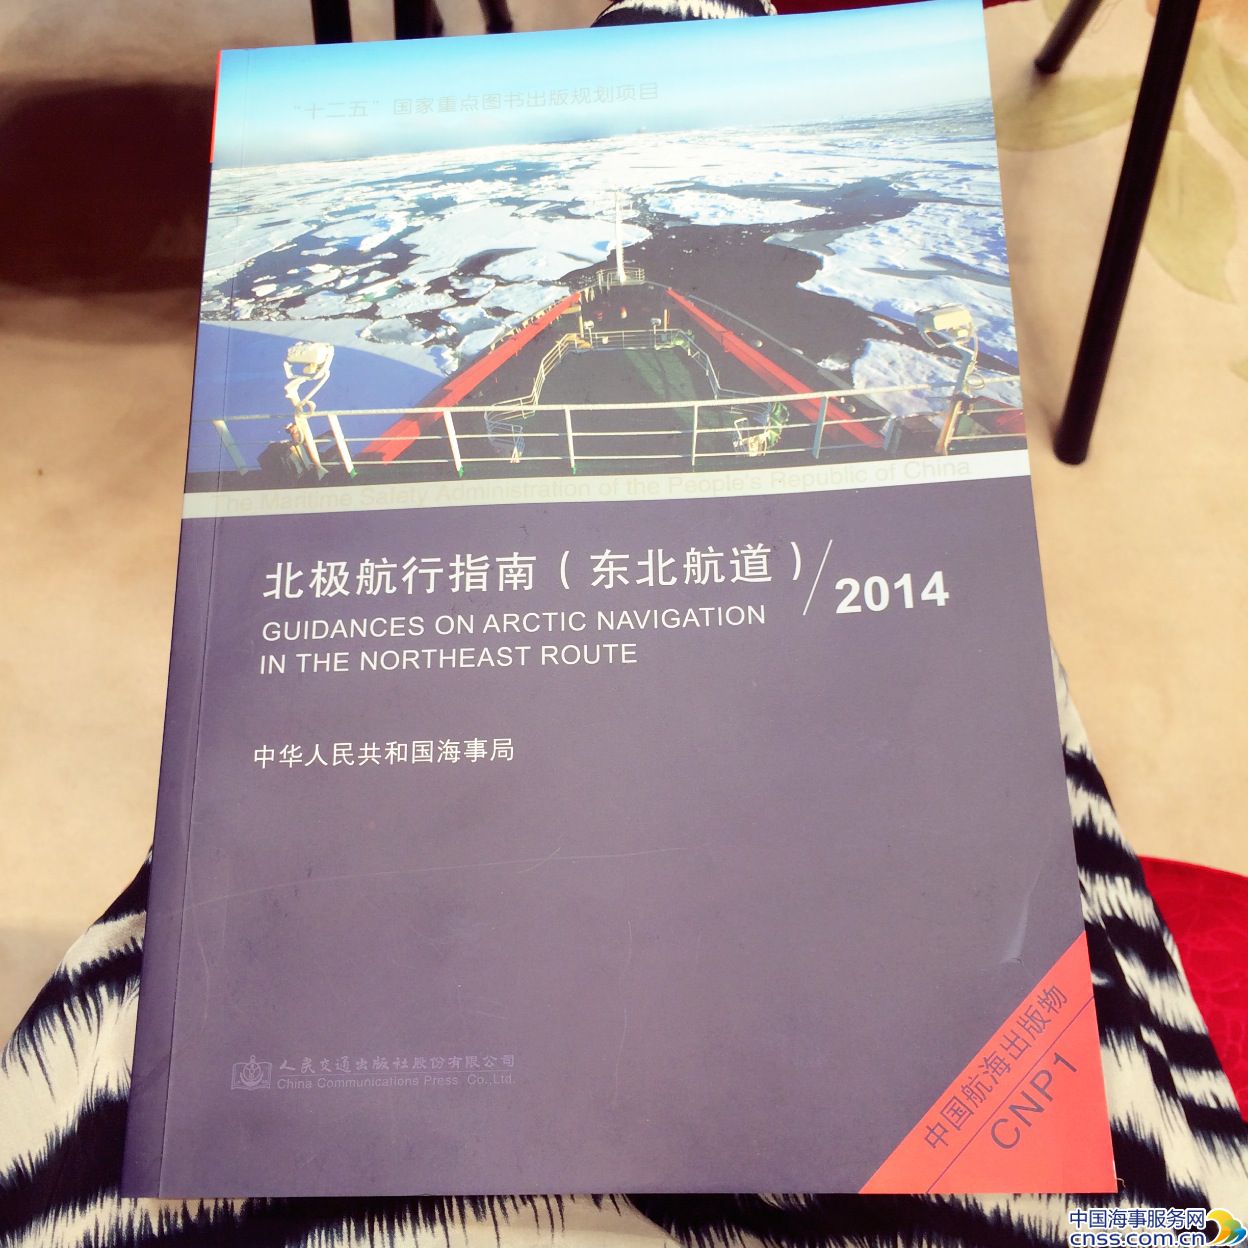  Arctic shipping route guide published in China 